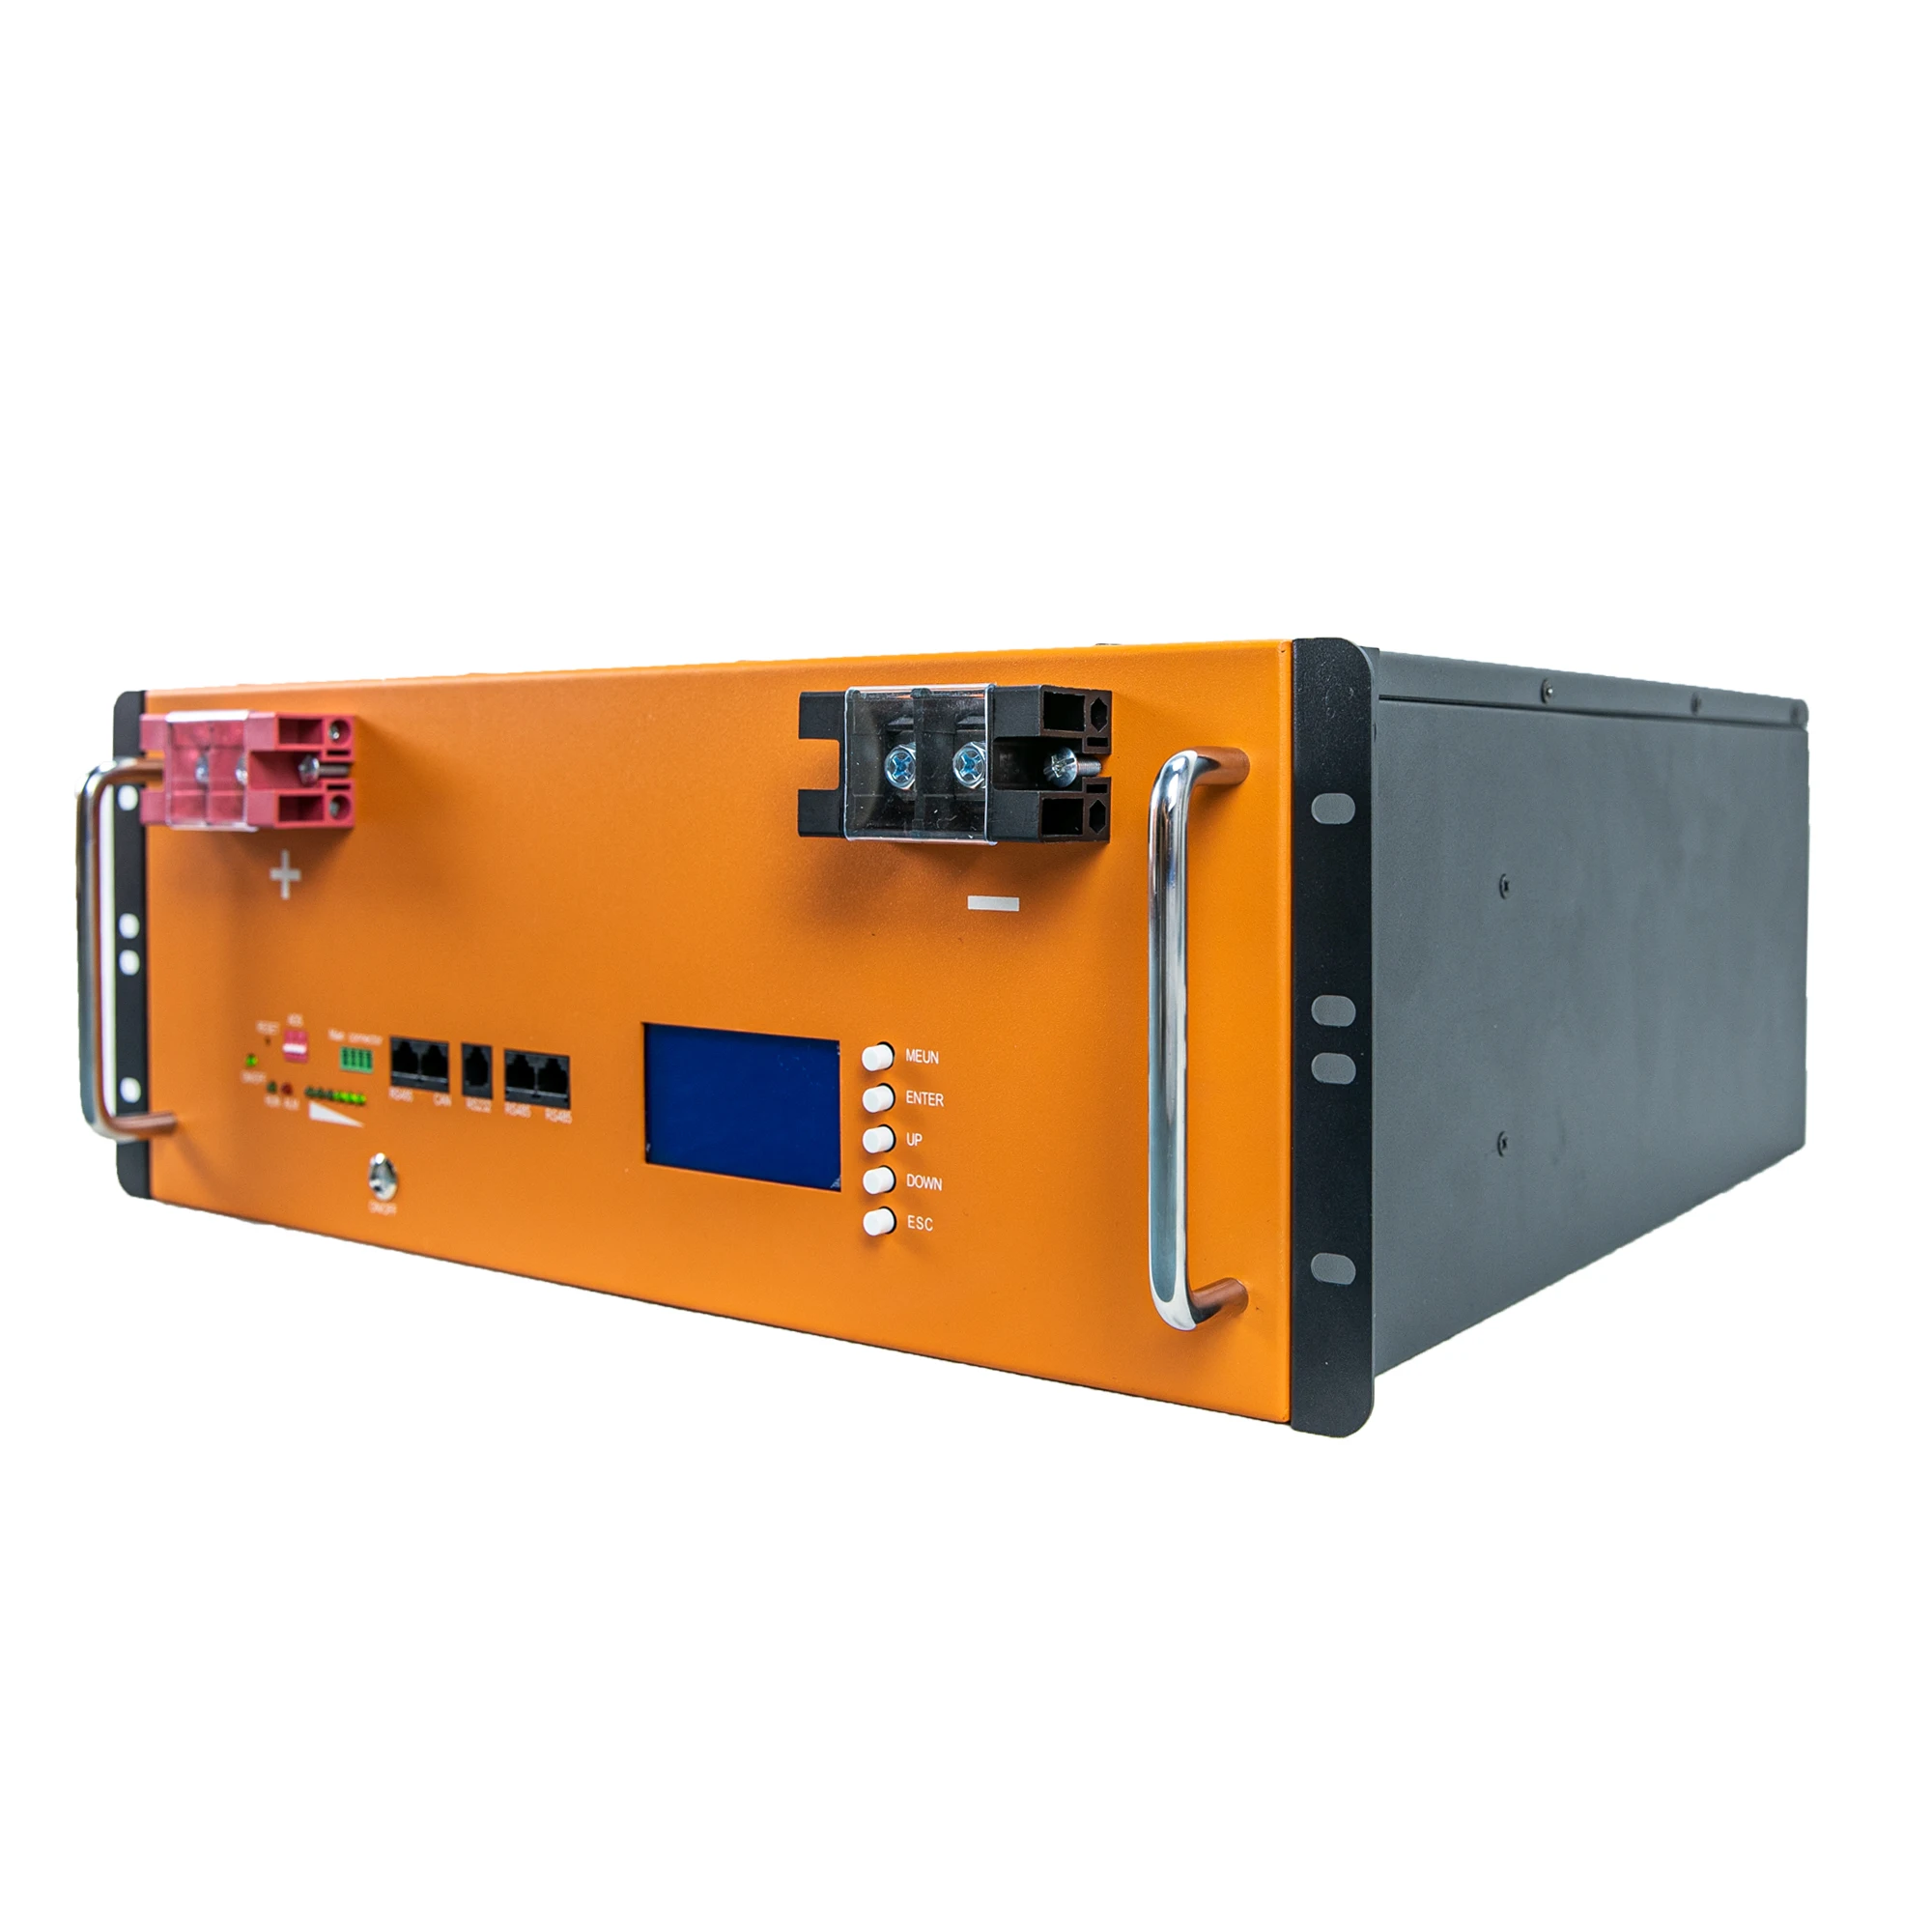 

48V 100Ah rack-mount battery 5KWh Solar Battery -LiFePo4 Lithium ion-LFP-rechargeable-off-grid power supply with Built-in BMS-4U